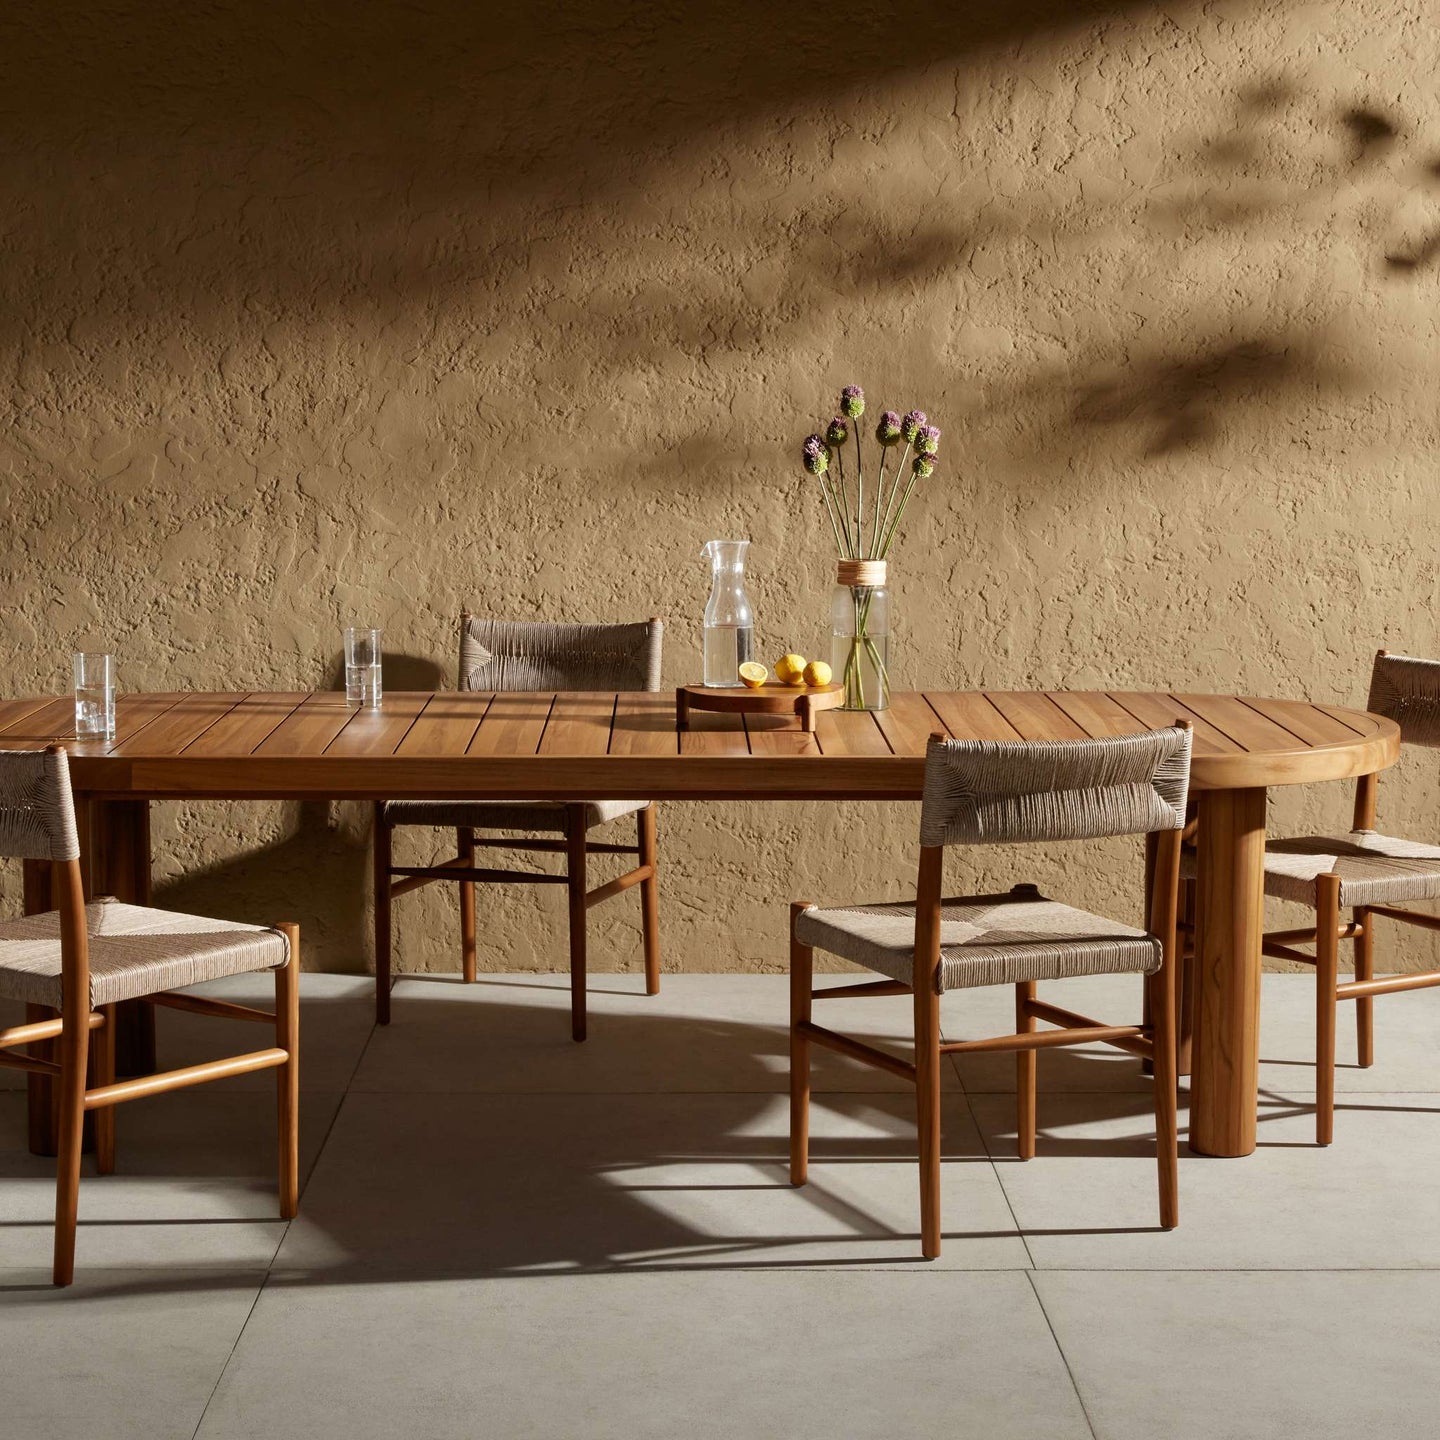 Messina Outdoor Dining Table 112